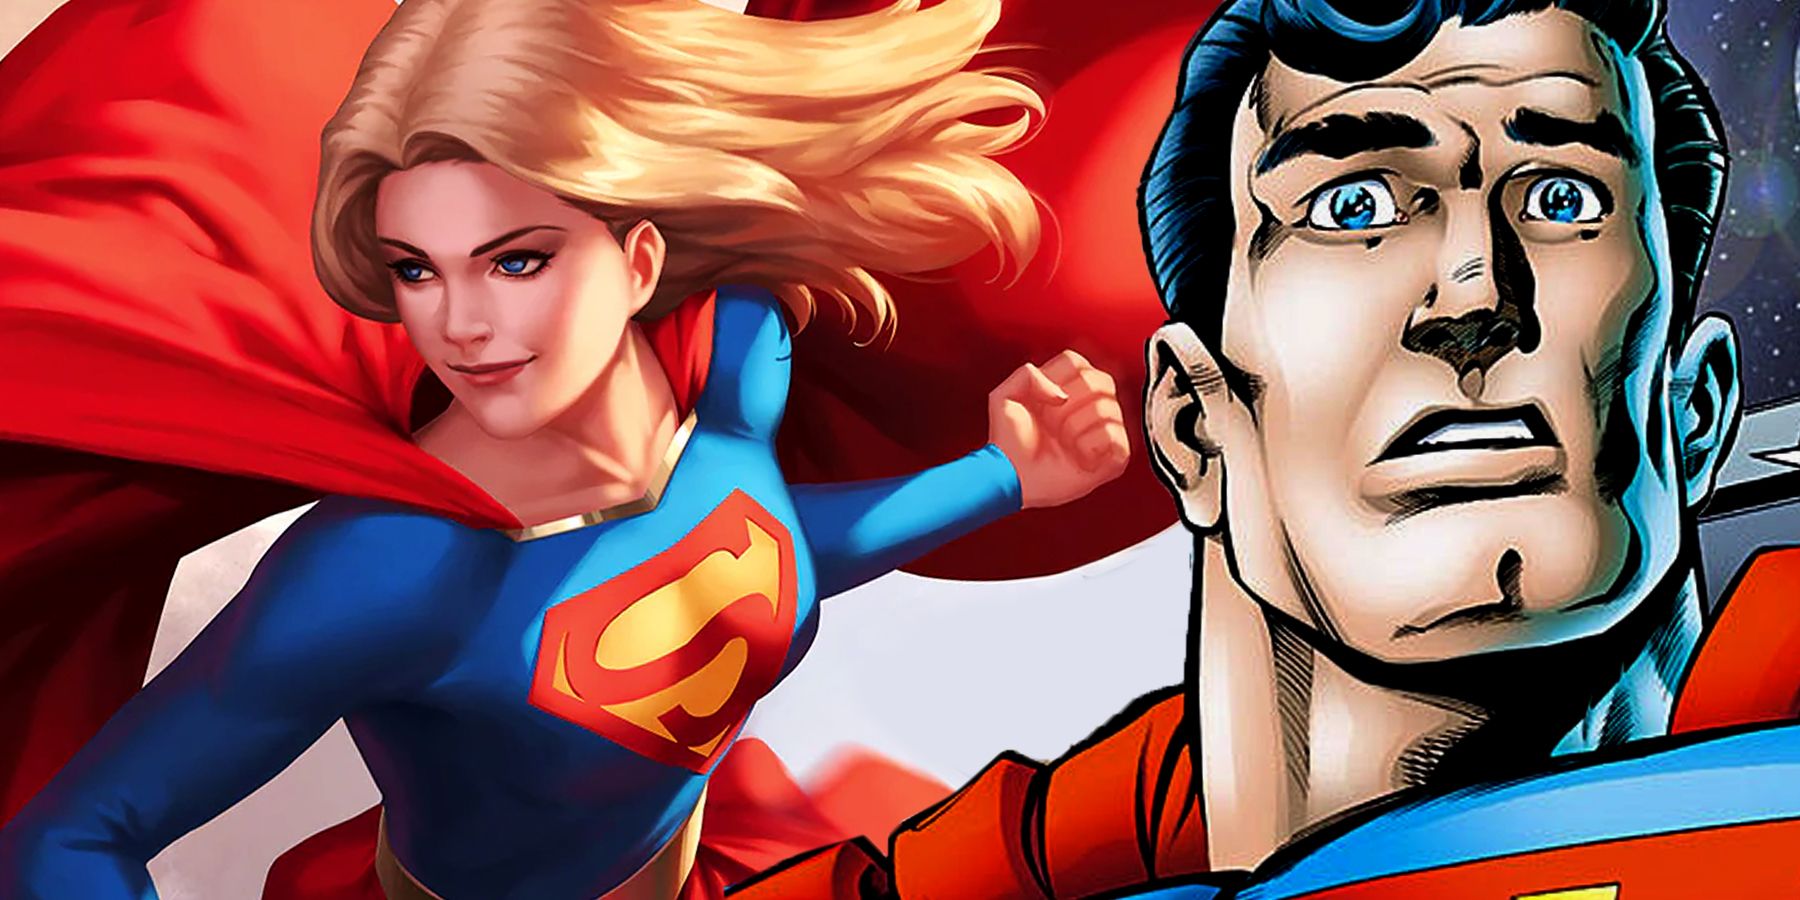 Supergirl next to a surprised Superman